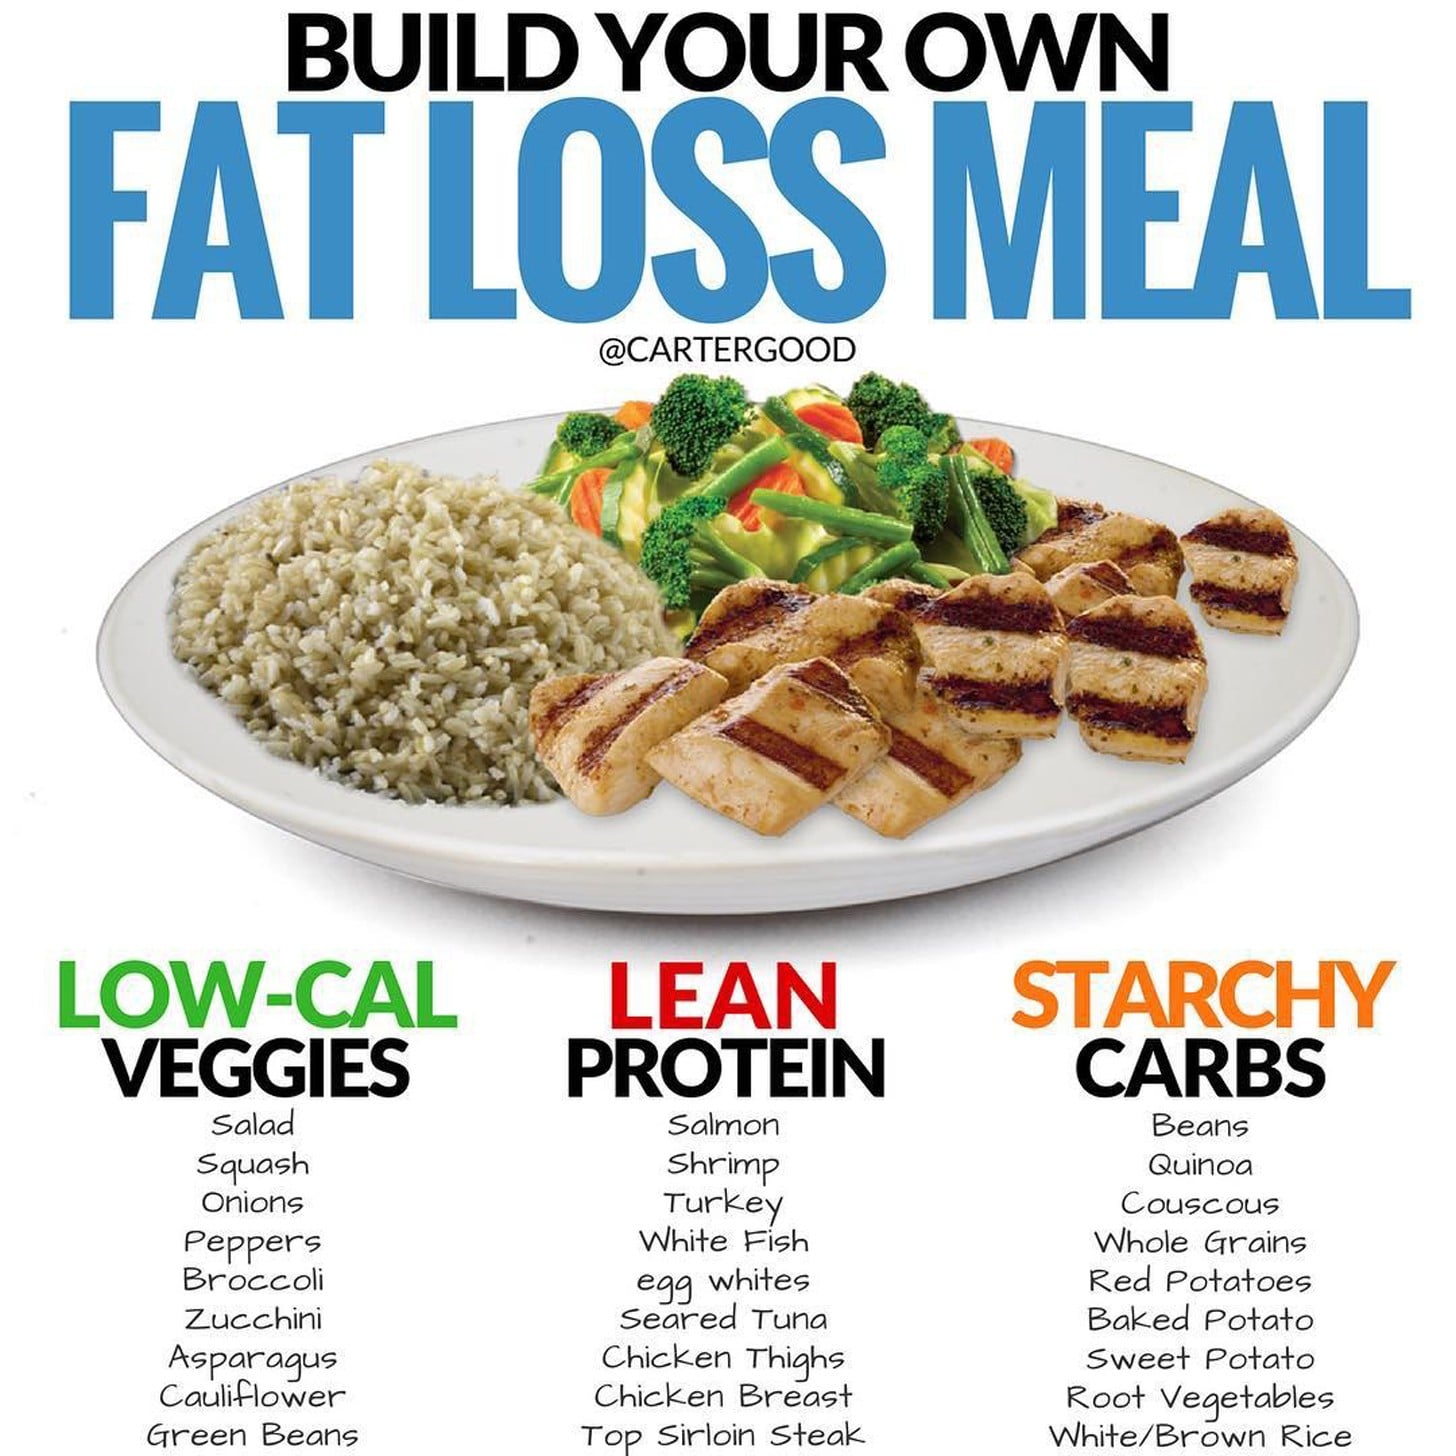 Fat Loss Meal | vlr.eng.br